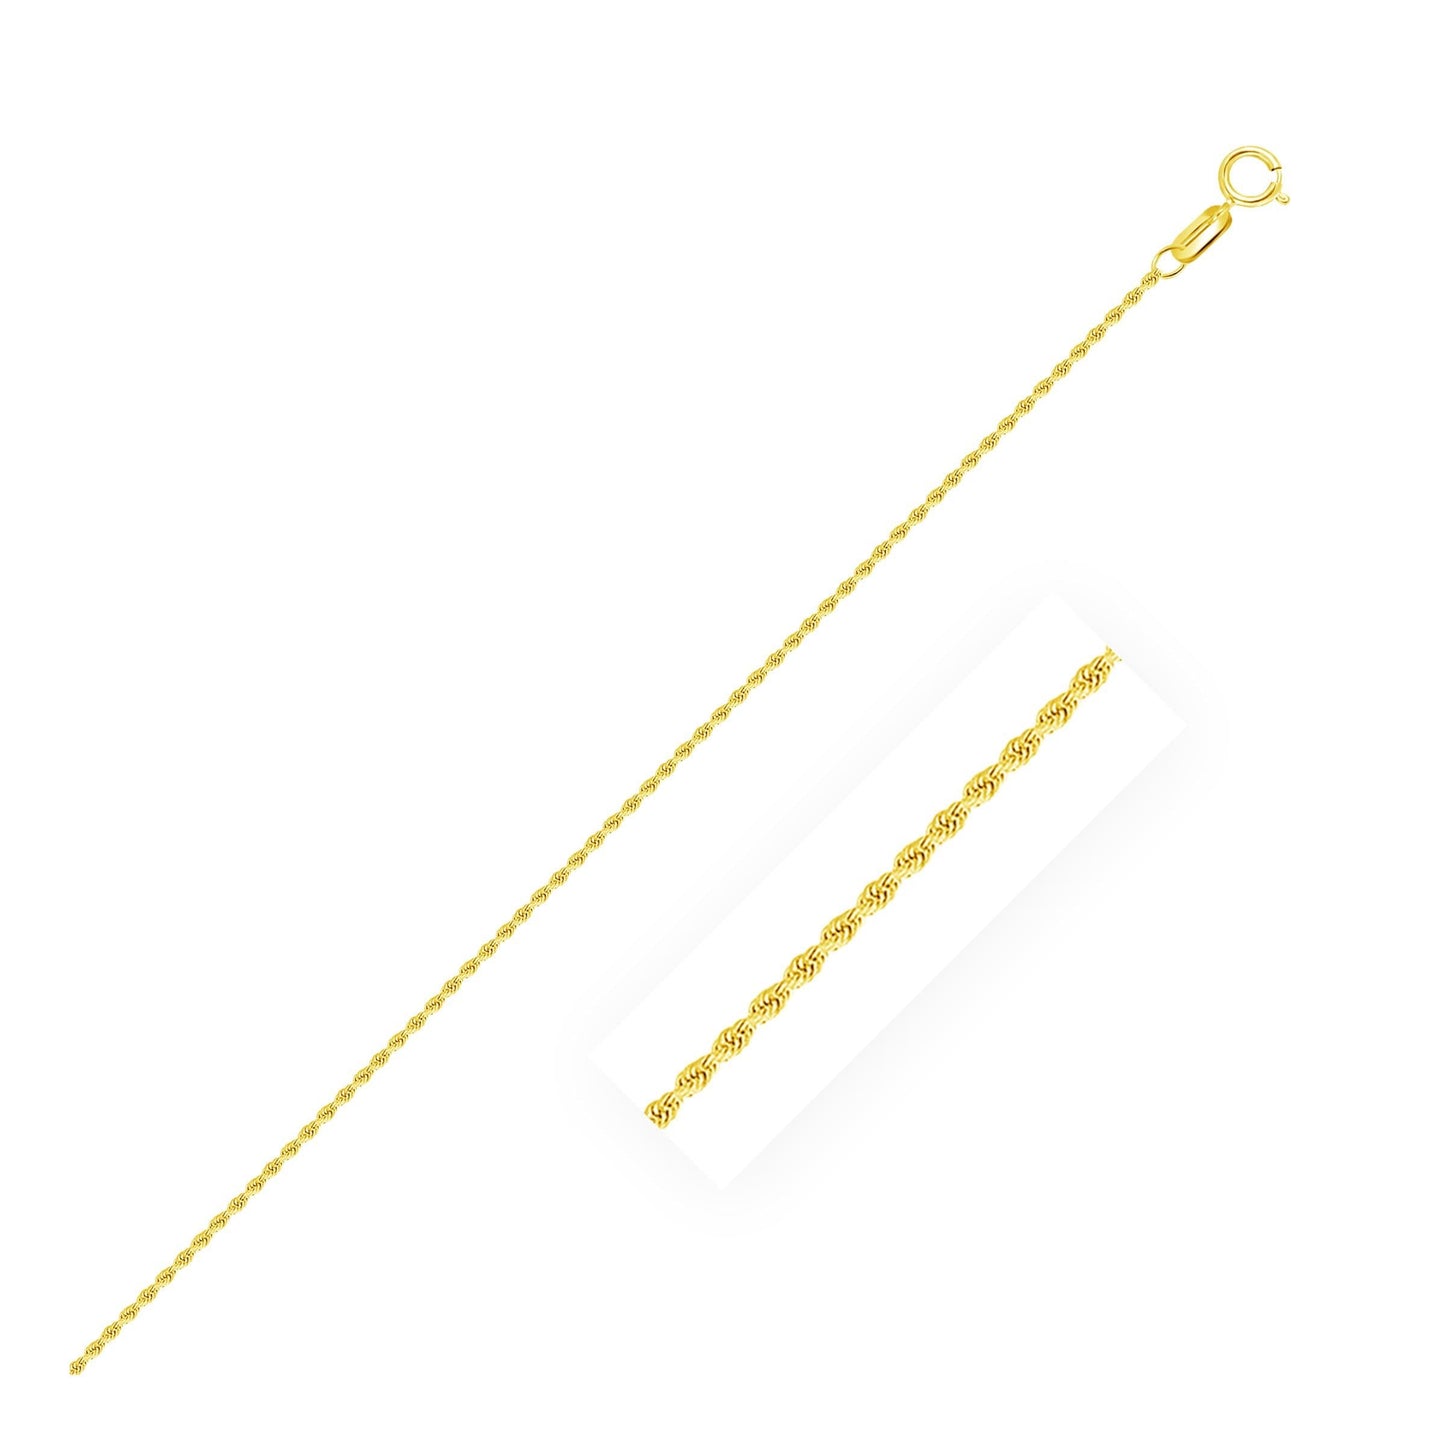 10k Yellow Gold Rope Chain in 1.25 mm